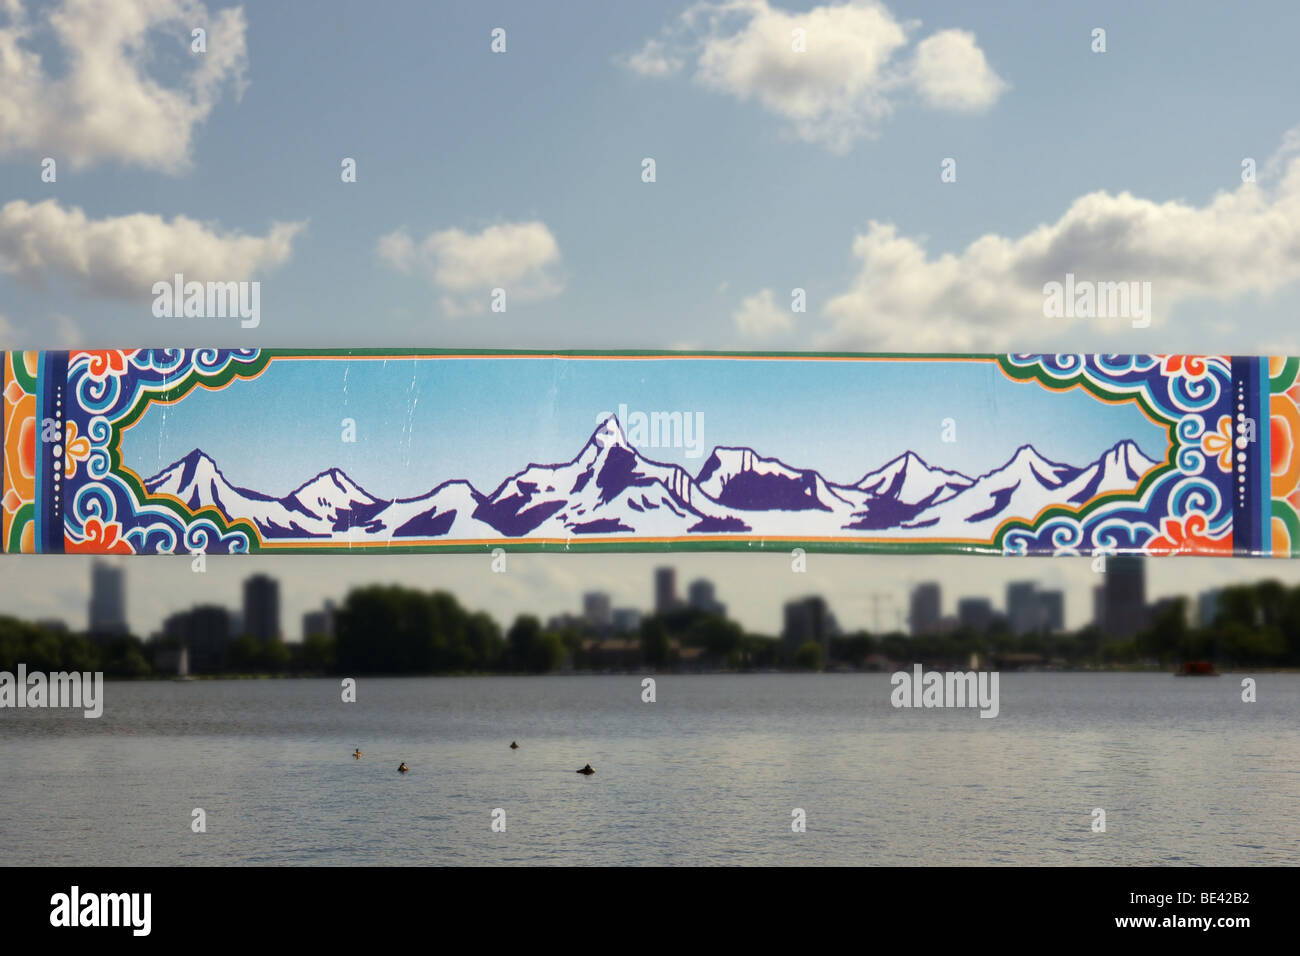 A silhouette of Himalayas on a paper tape aligned to a cityscape of Rotterdam, Netherlands above Kralingen lake Stock Photo